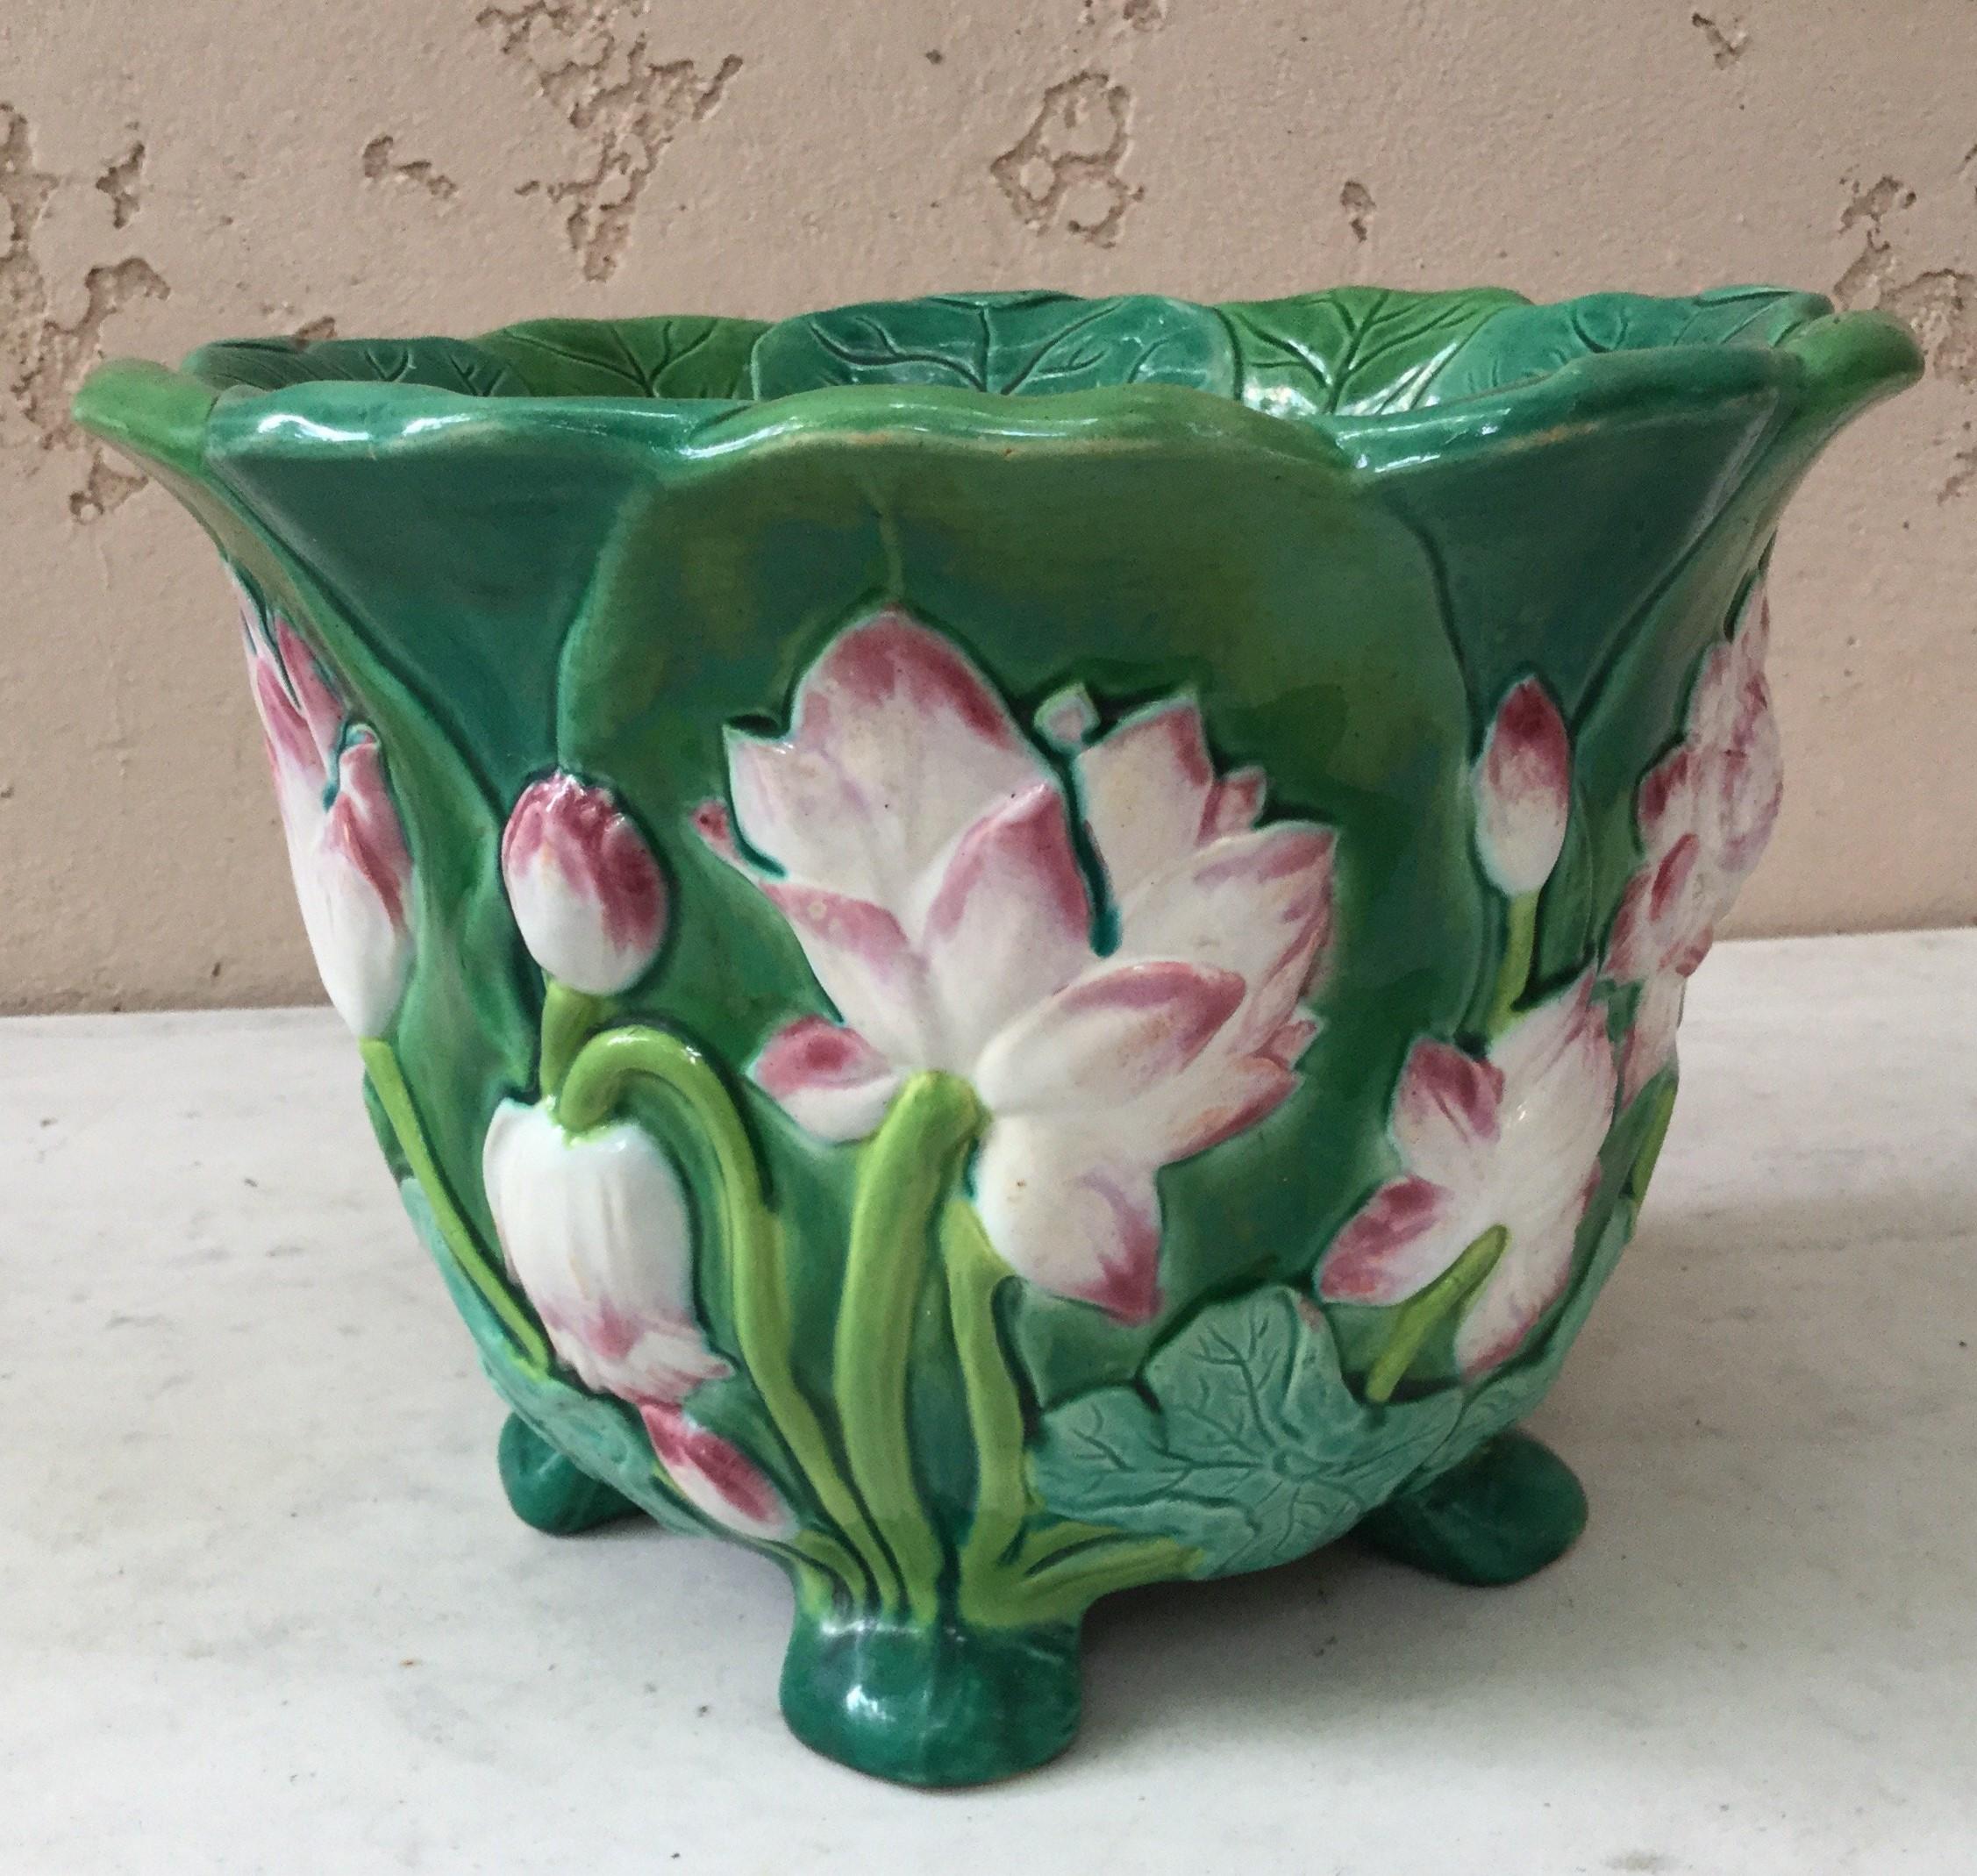 Victorian Majolica jardinière white pond lily blossoms with pink edge signed Minton, circa 1860.